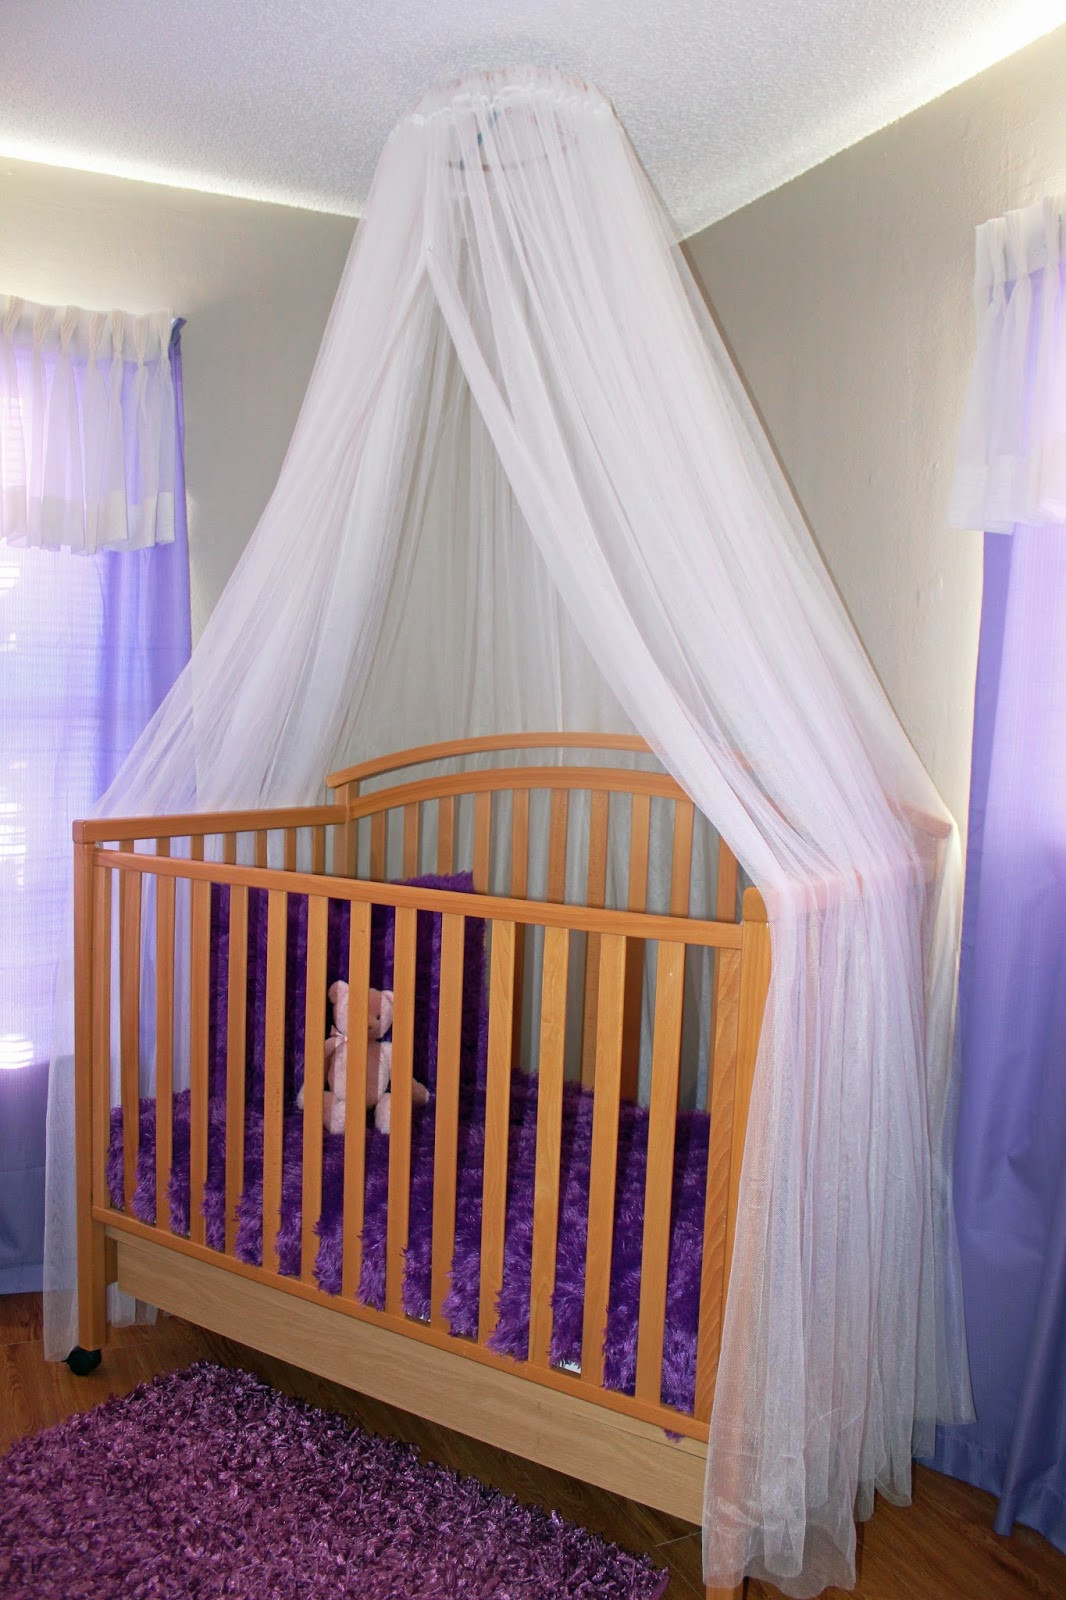 Toddler Bed Canopy DIY
 DIY How To Make A Crib Canopy